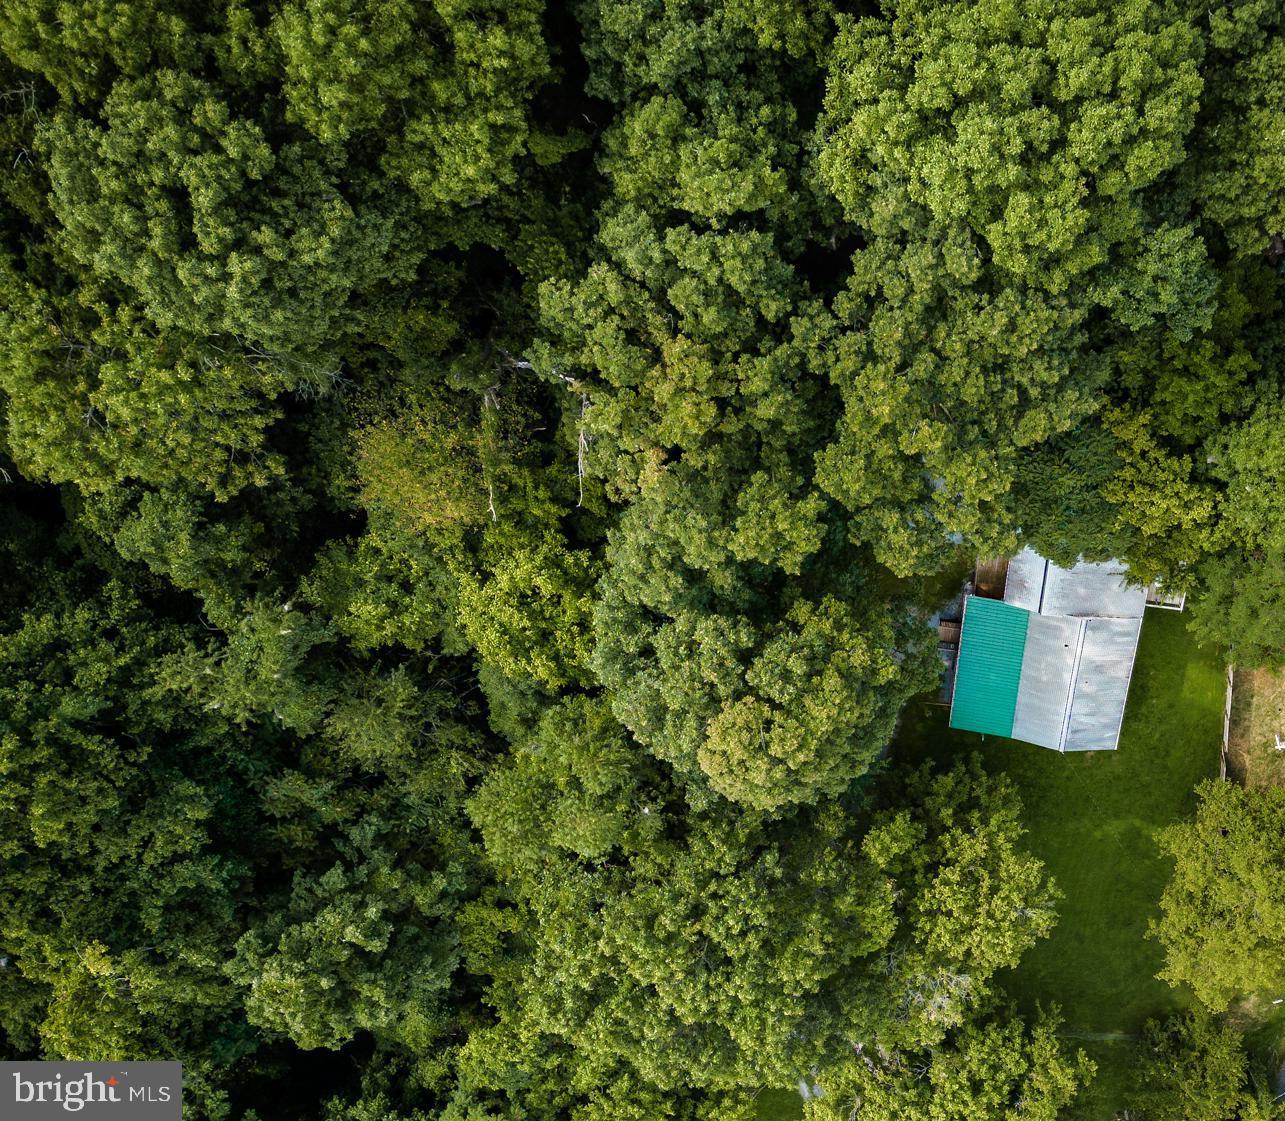 a bird view of a house in a forest